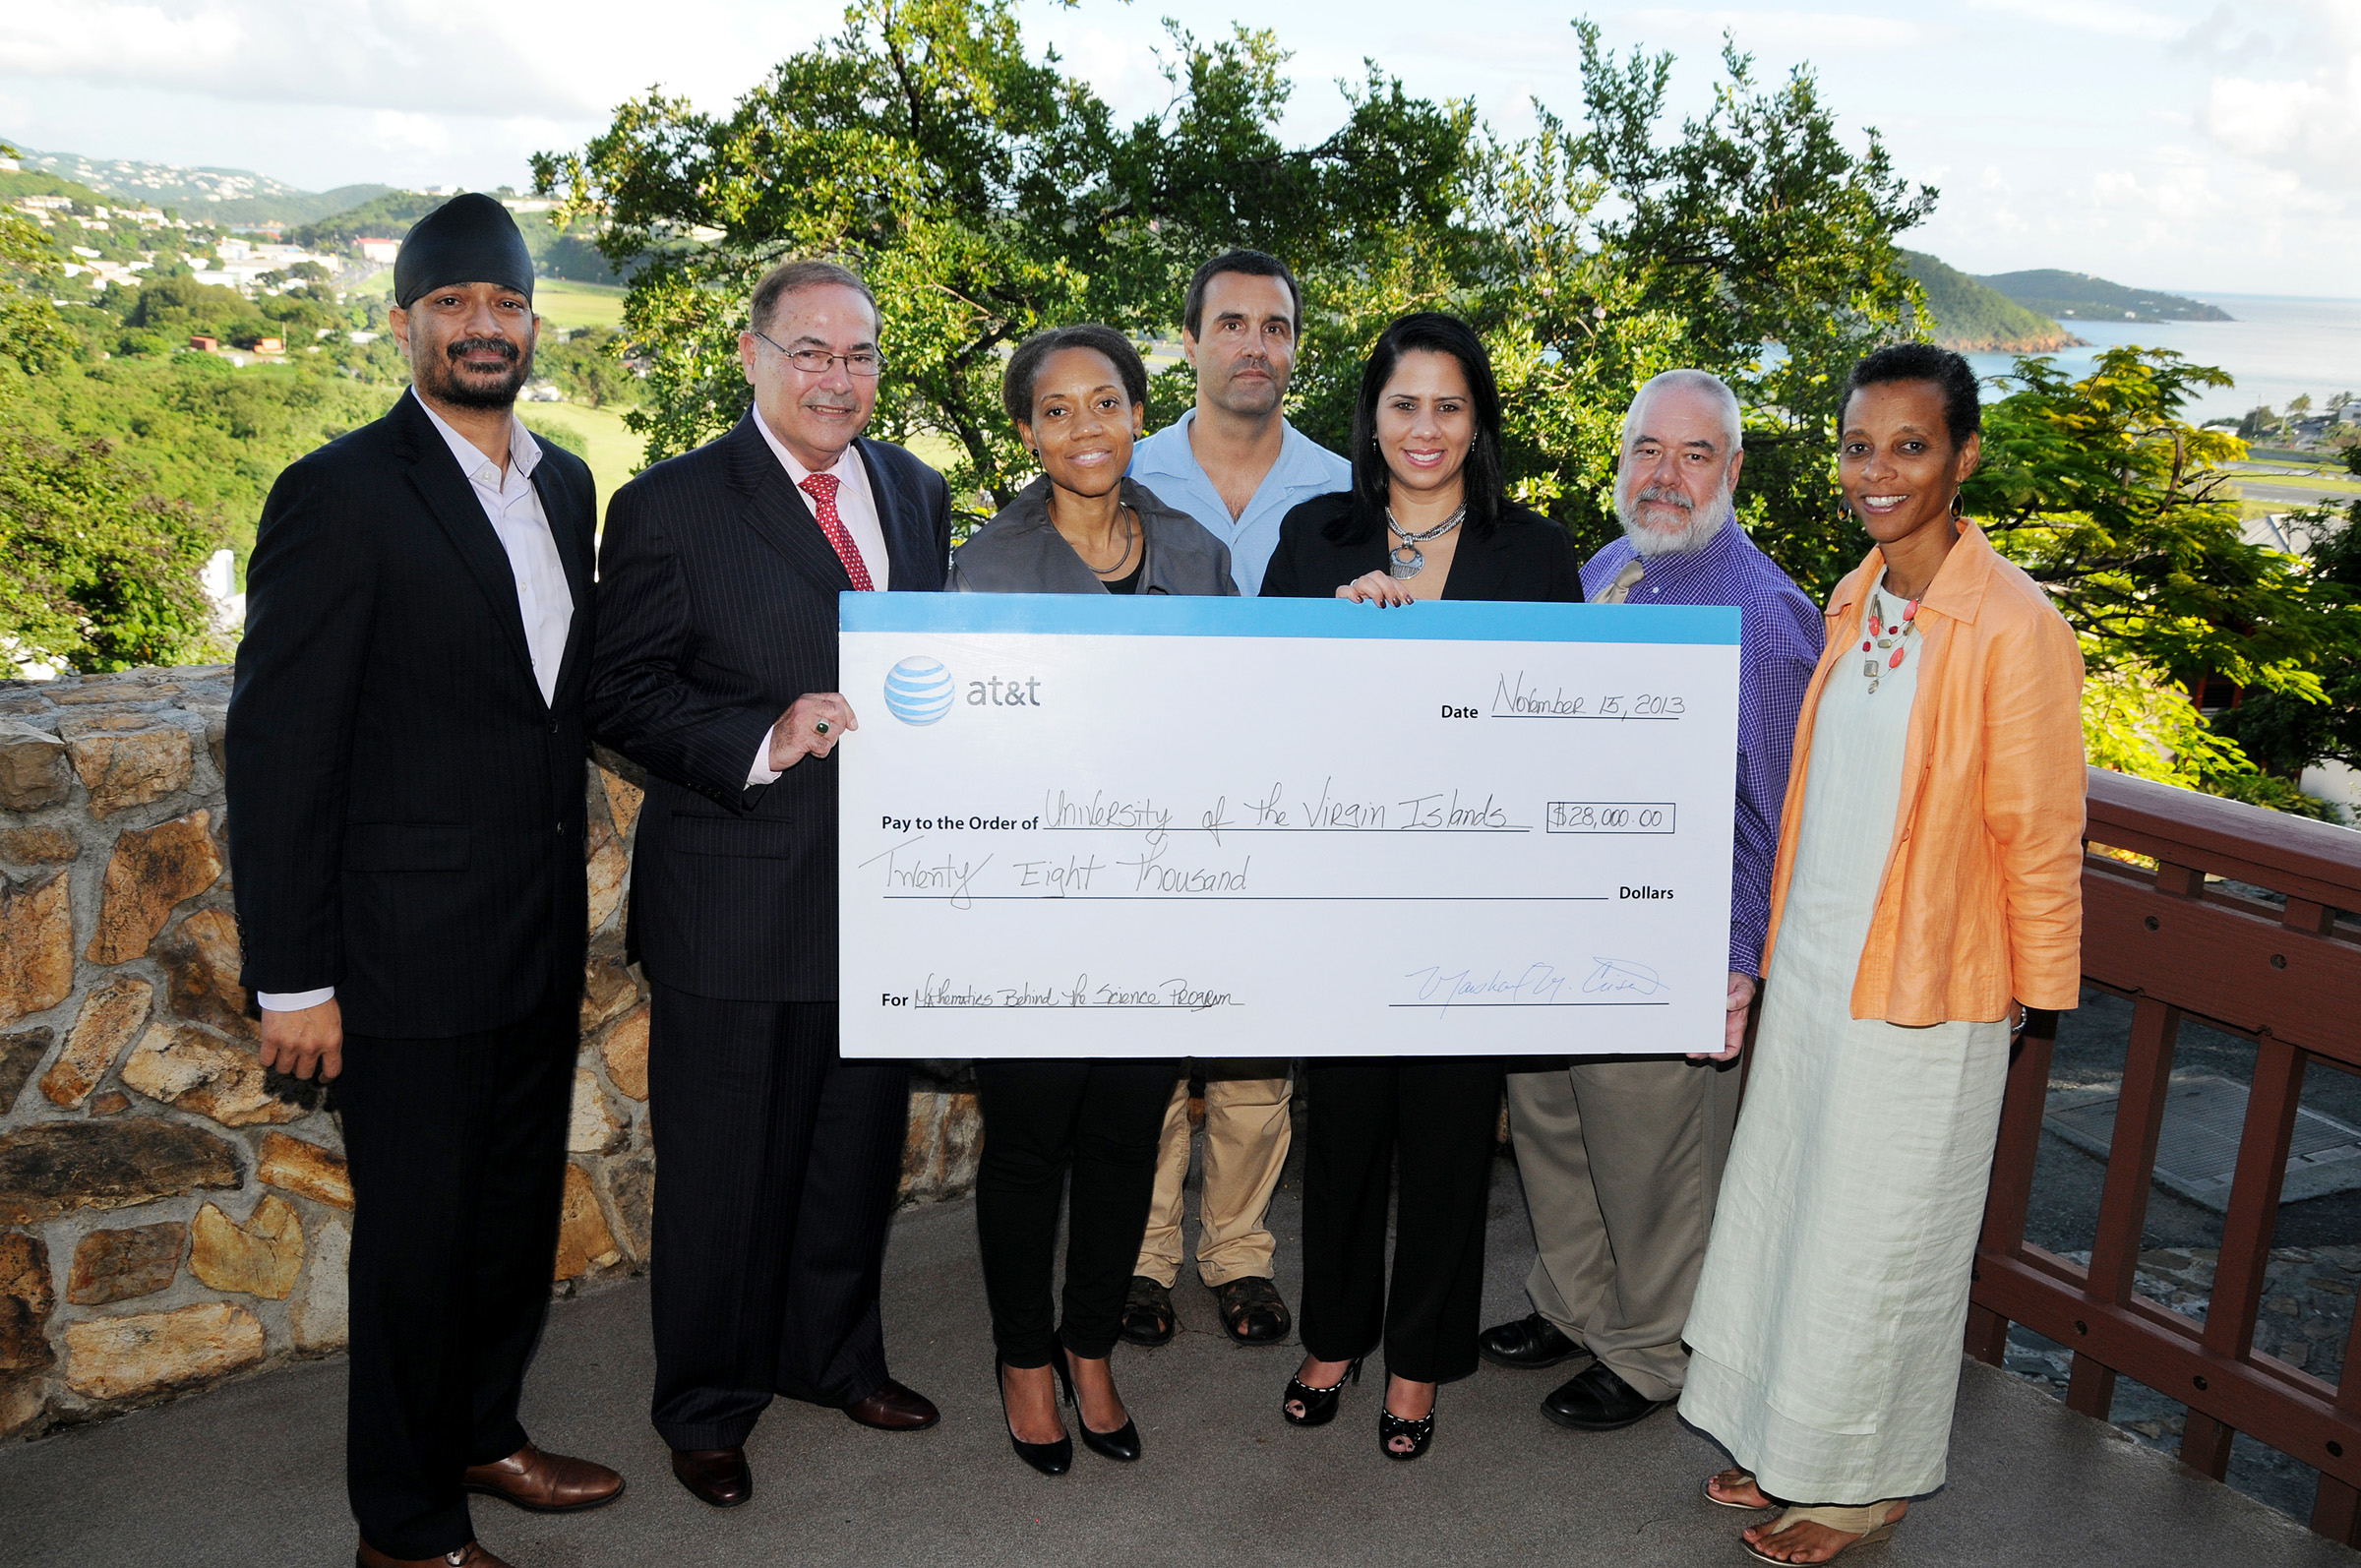 Accepting the $5,000 check from Wyndham Vacation Ownership are, from left, UVI President Dr. David Hall, Interim Director of UVI’s Hospitality and Tourism Management Program Tamara Lang, Windham Director of Resort Operations for the Caribbean Region Bryan Dixon, Windham Executive Vice President of Human Resources Sarah King and UVI Vice President for Institutional Advancement Dionne Jackson.